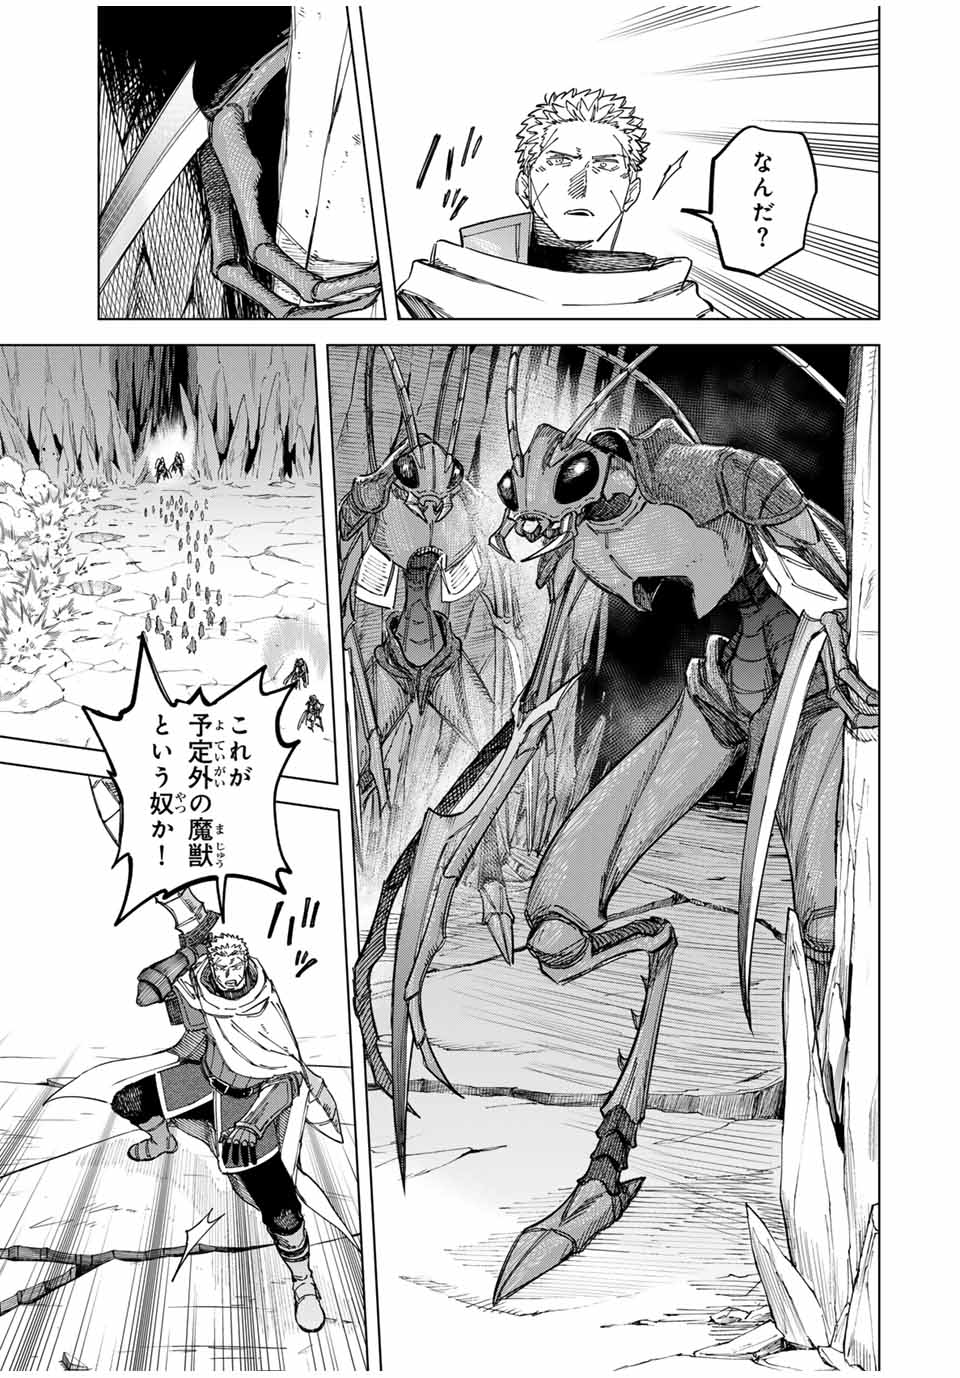 Witch and Mercenary 魔女と傭兵 第17話 - Page 7